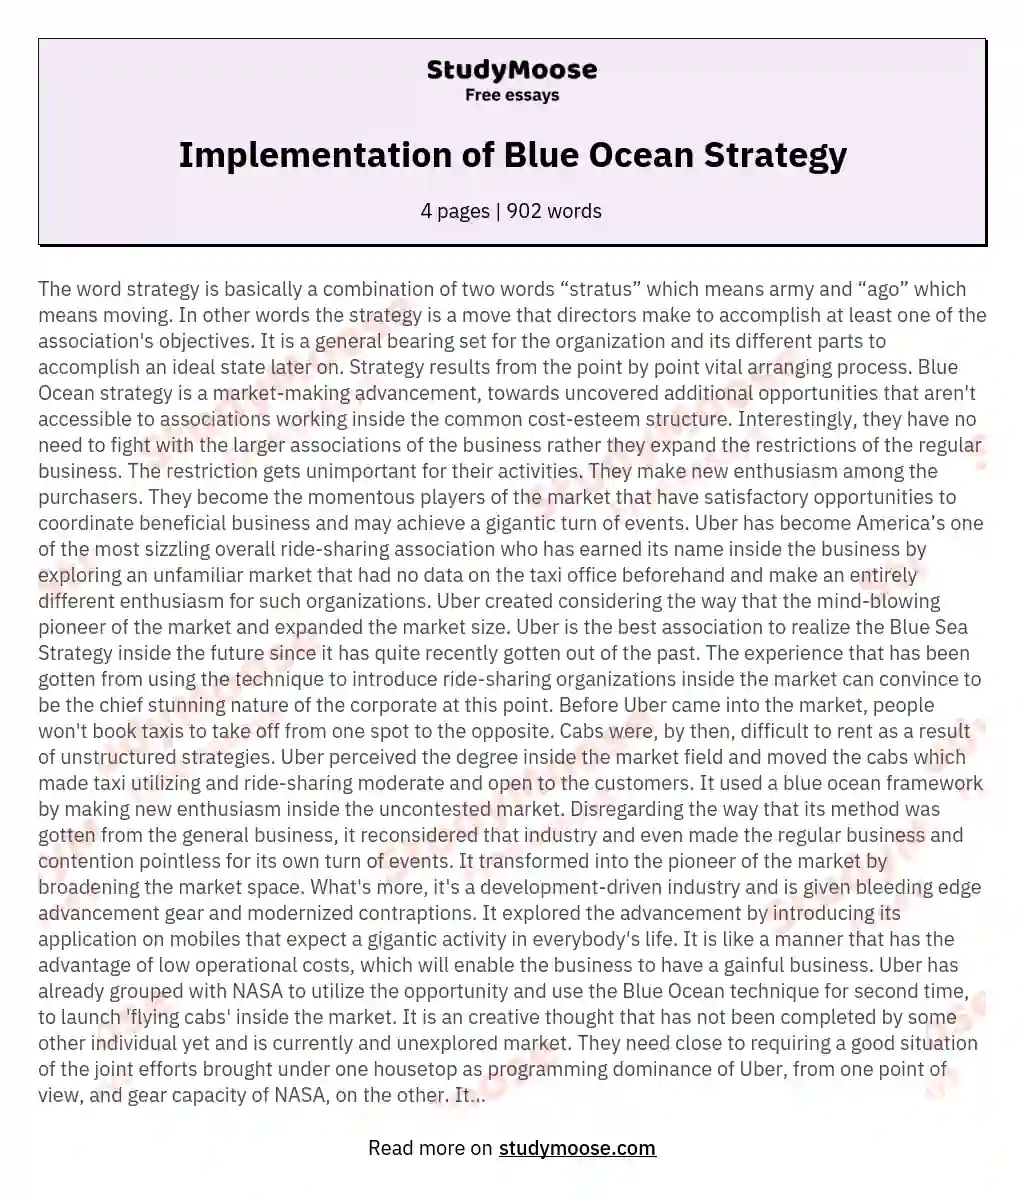 Implementation of Blue Ocean Strategy